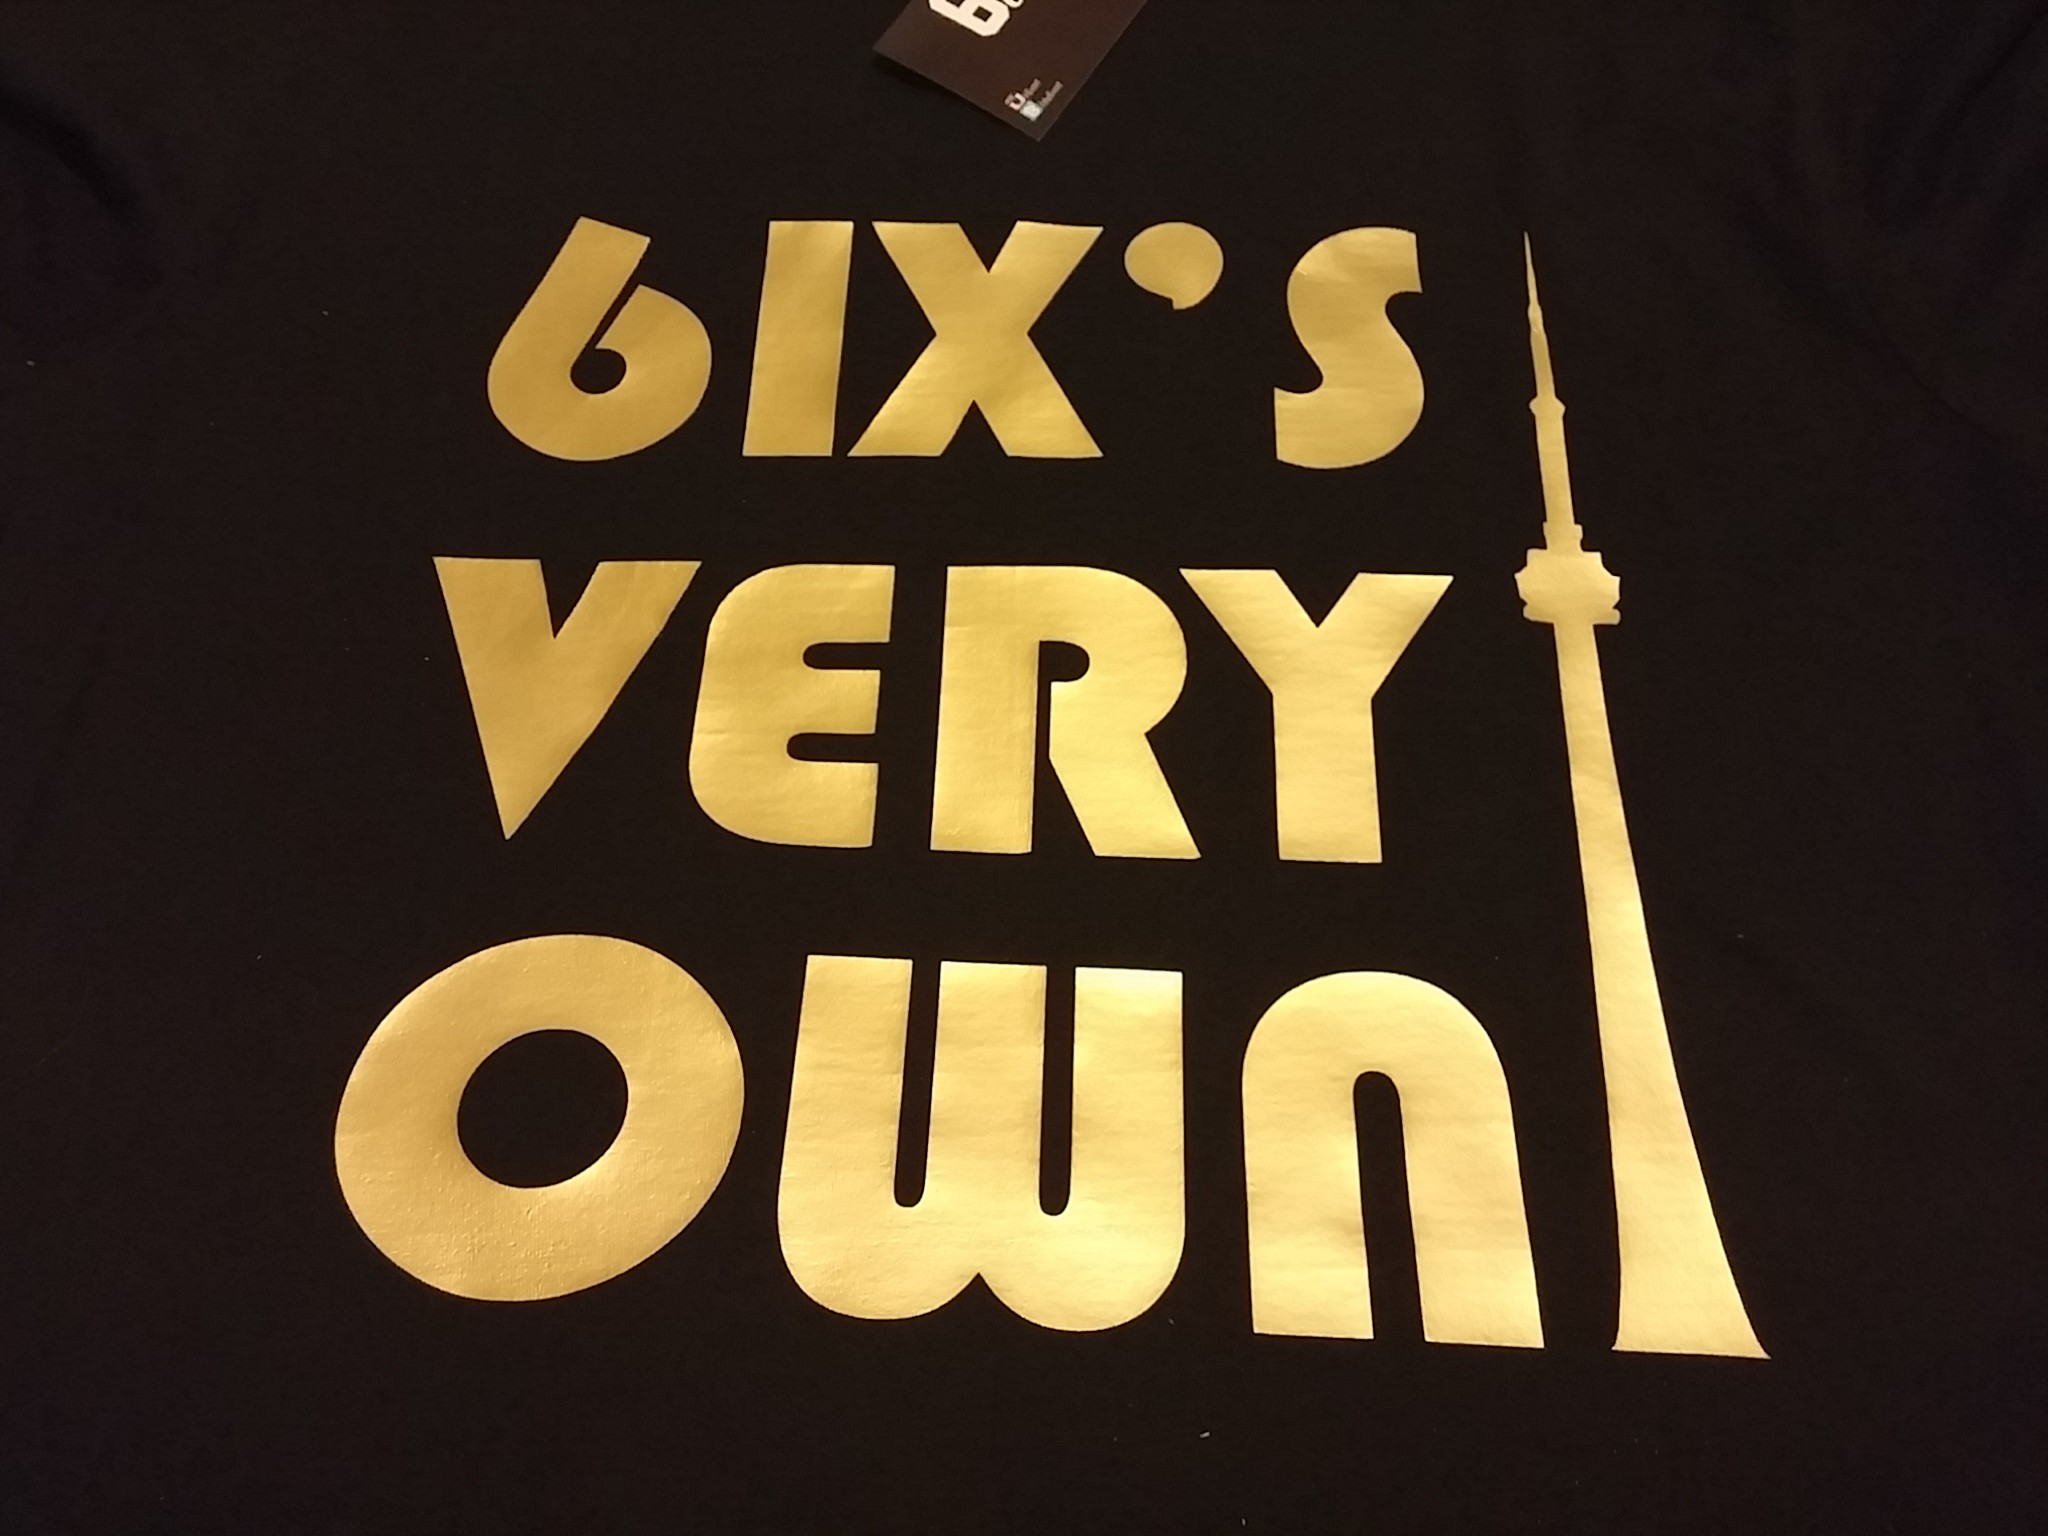 2048x1536 6ix's Very Own (6VO) by 6ixset - Black and Gold